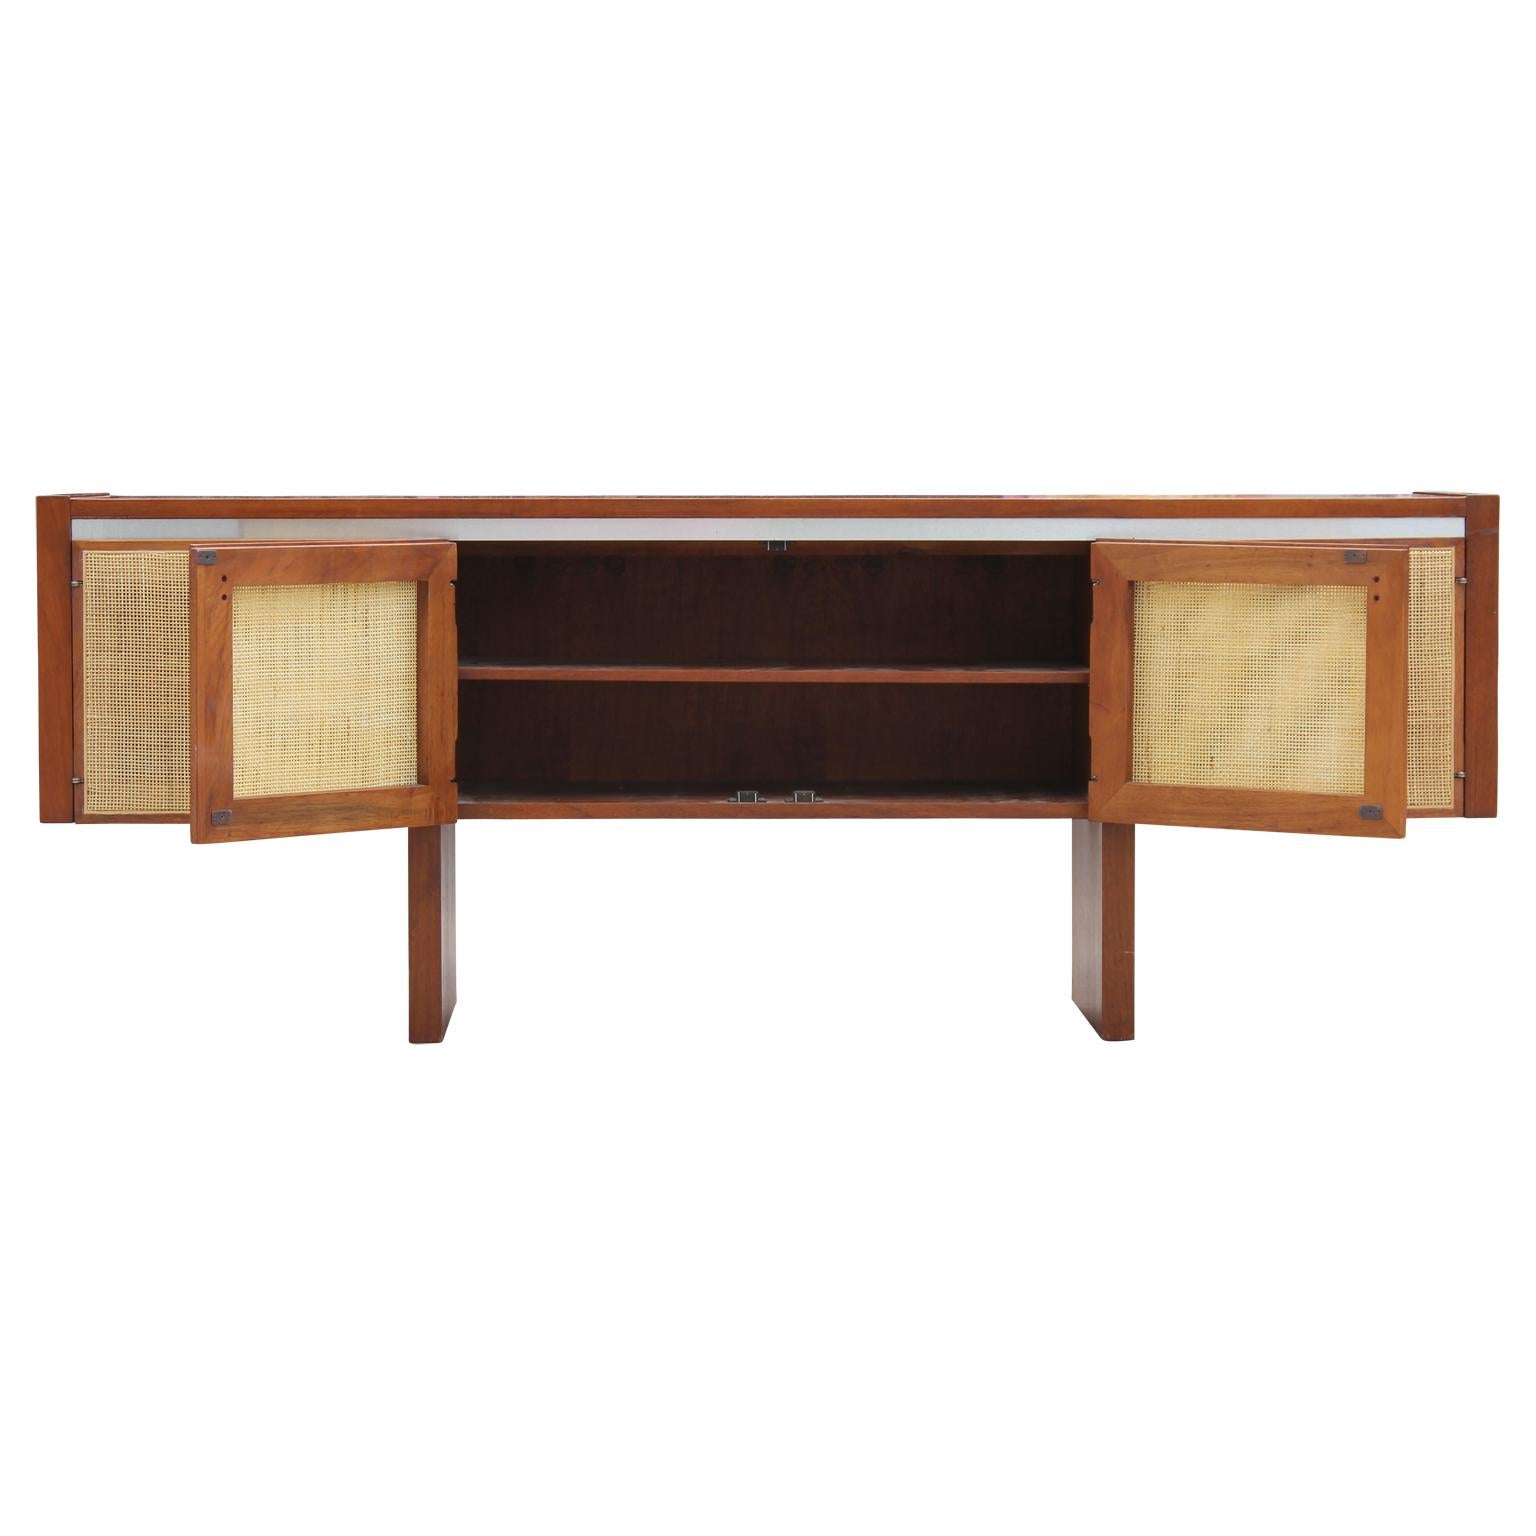 Striking caned credenza attributed to Edward Wormley for Dunbar. It has four doors that are caned with shelving inside.